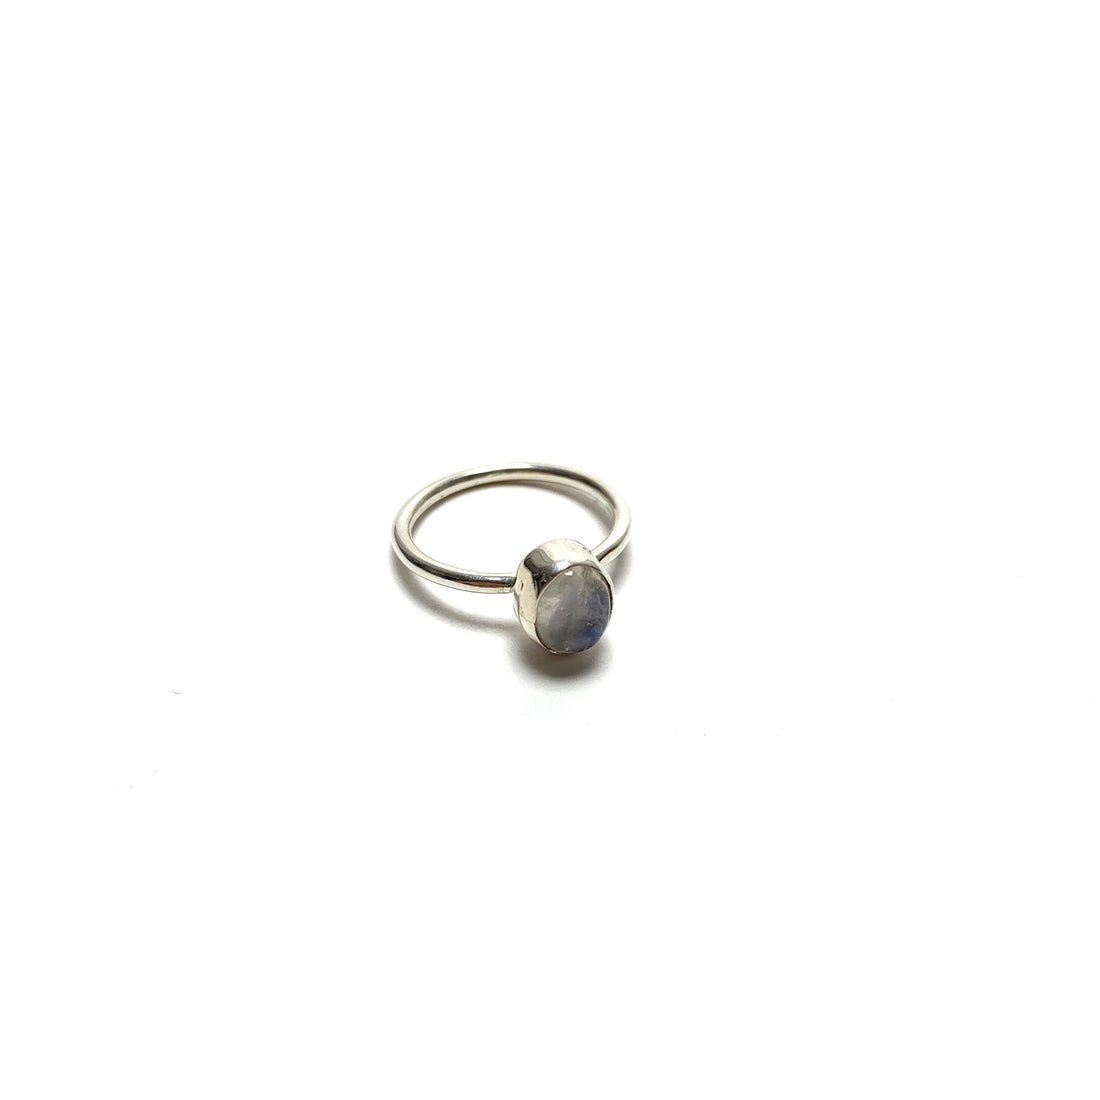 Moonstone Silver Ring Rings Crystals J. $18.00 Size 6 